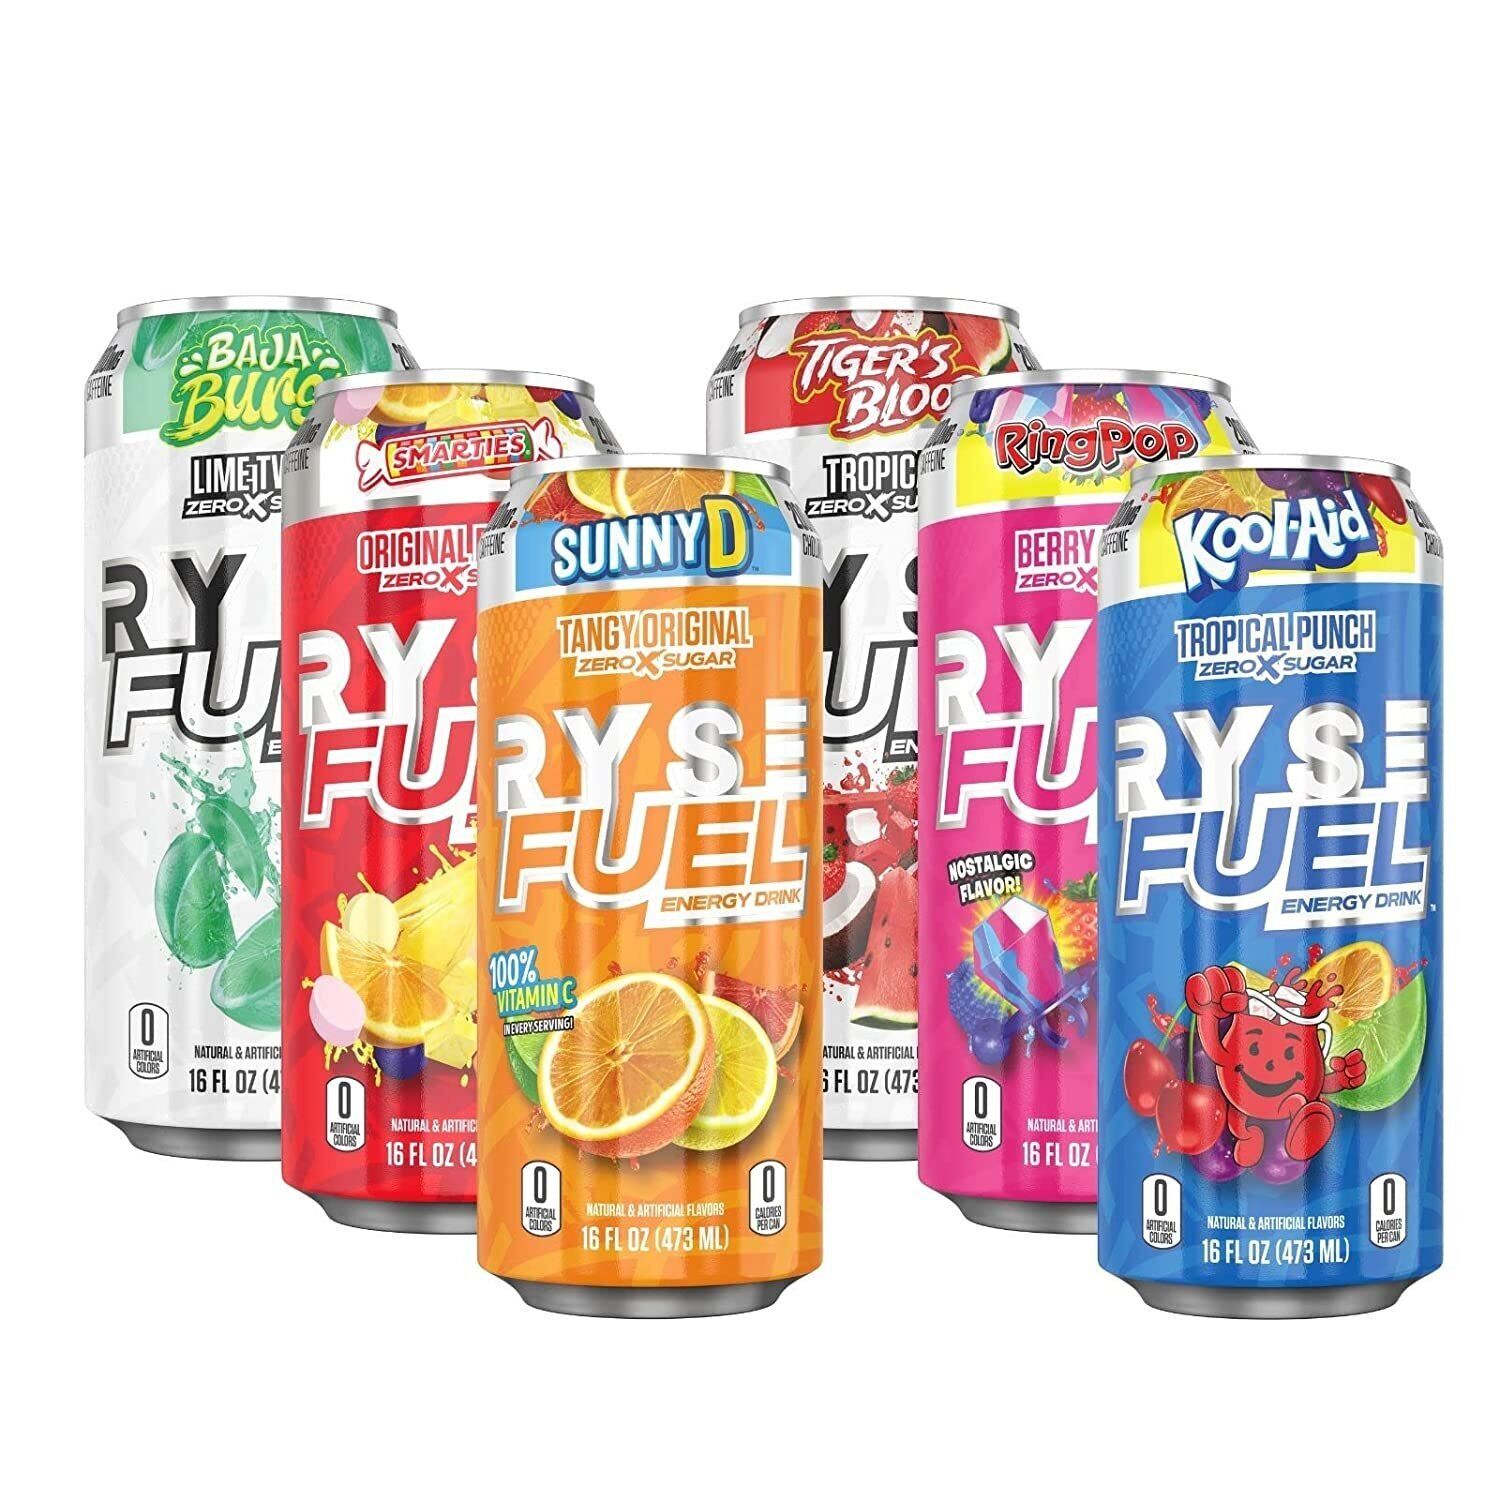 RYSE Fuel Energy Drink | 0 Sugars | 0 Calories | 16 oz Cans | 12 Pack